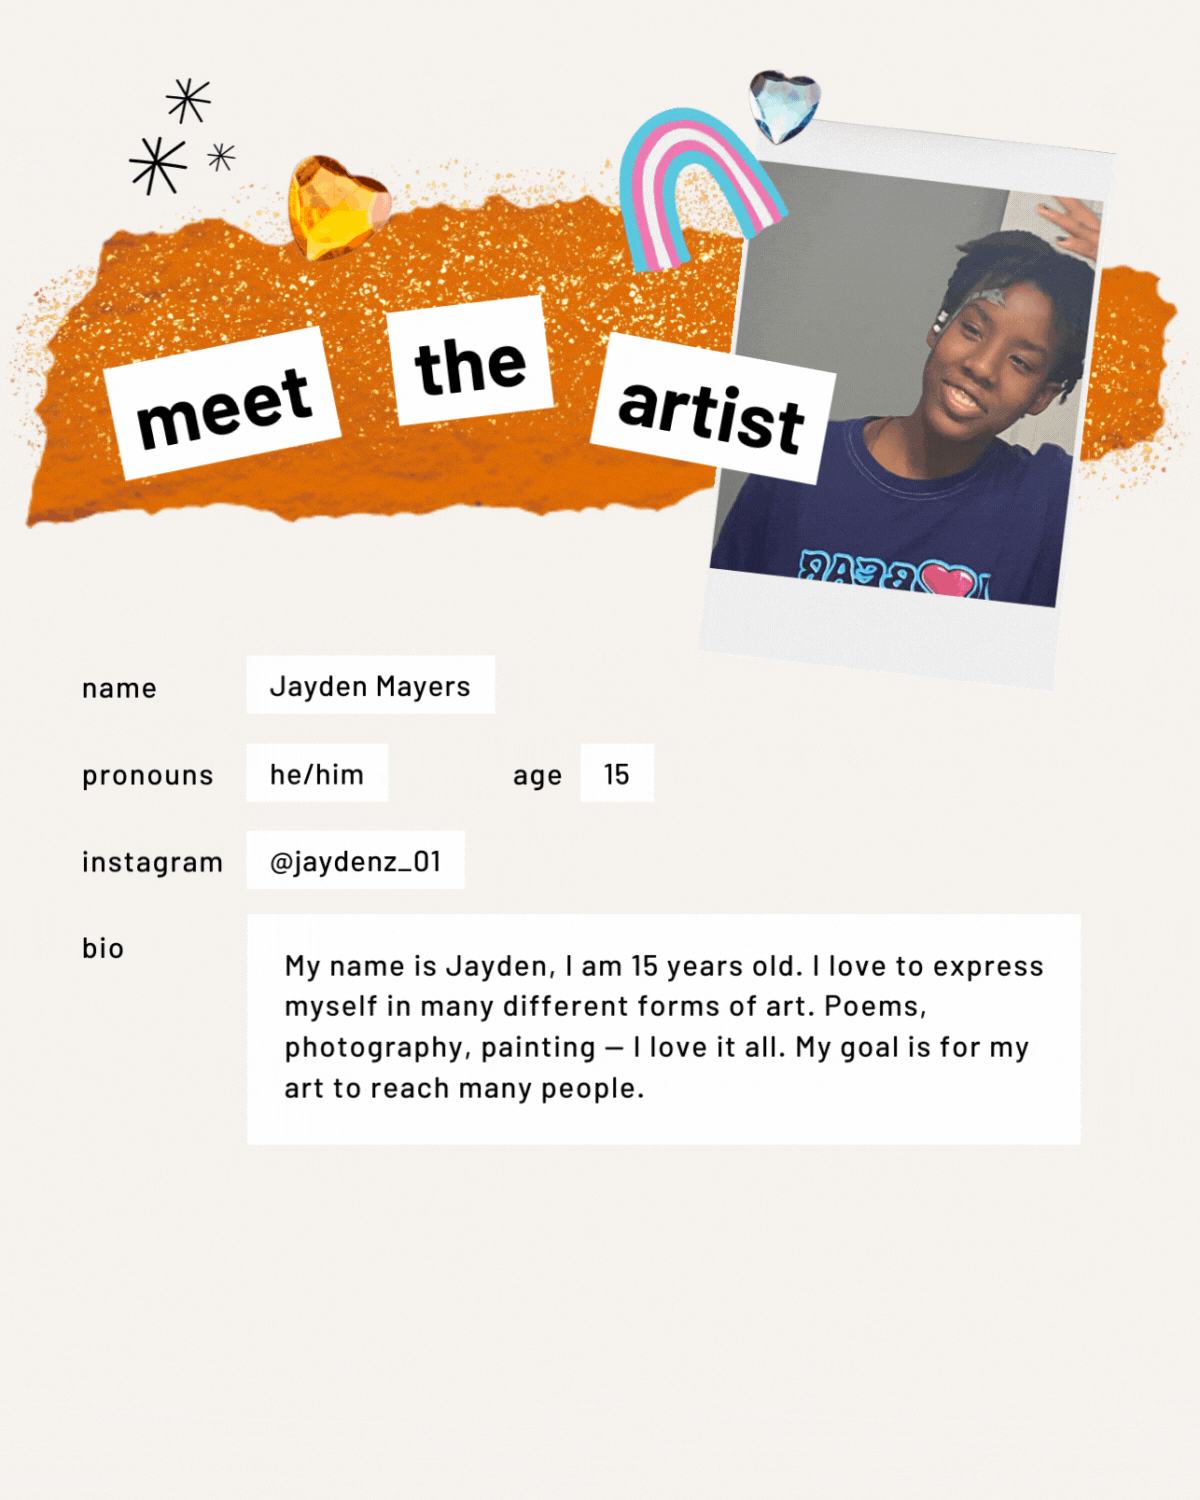 Meet the artist page featuring an image of a person. Name: Jayden Mayers. Pronouns: he/him. Age: 15. Bio: My name is Jayden, and I am 15 years old. I love to express myself in many different forms of art. Poems, photography, painting: I love it all. My goal is for my art to reach many people.